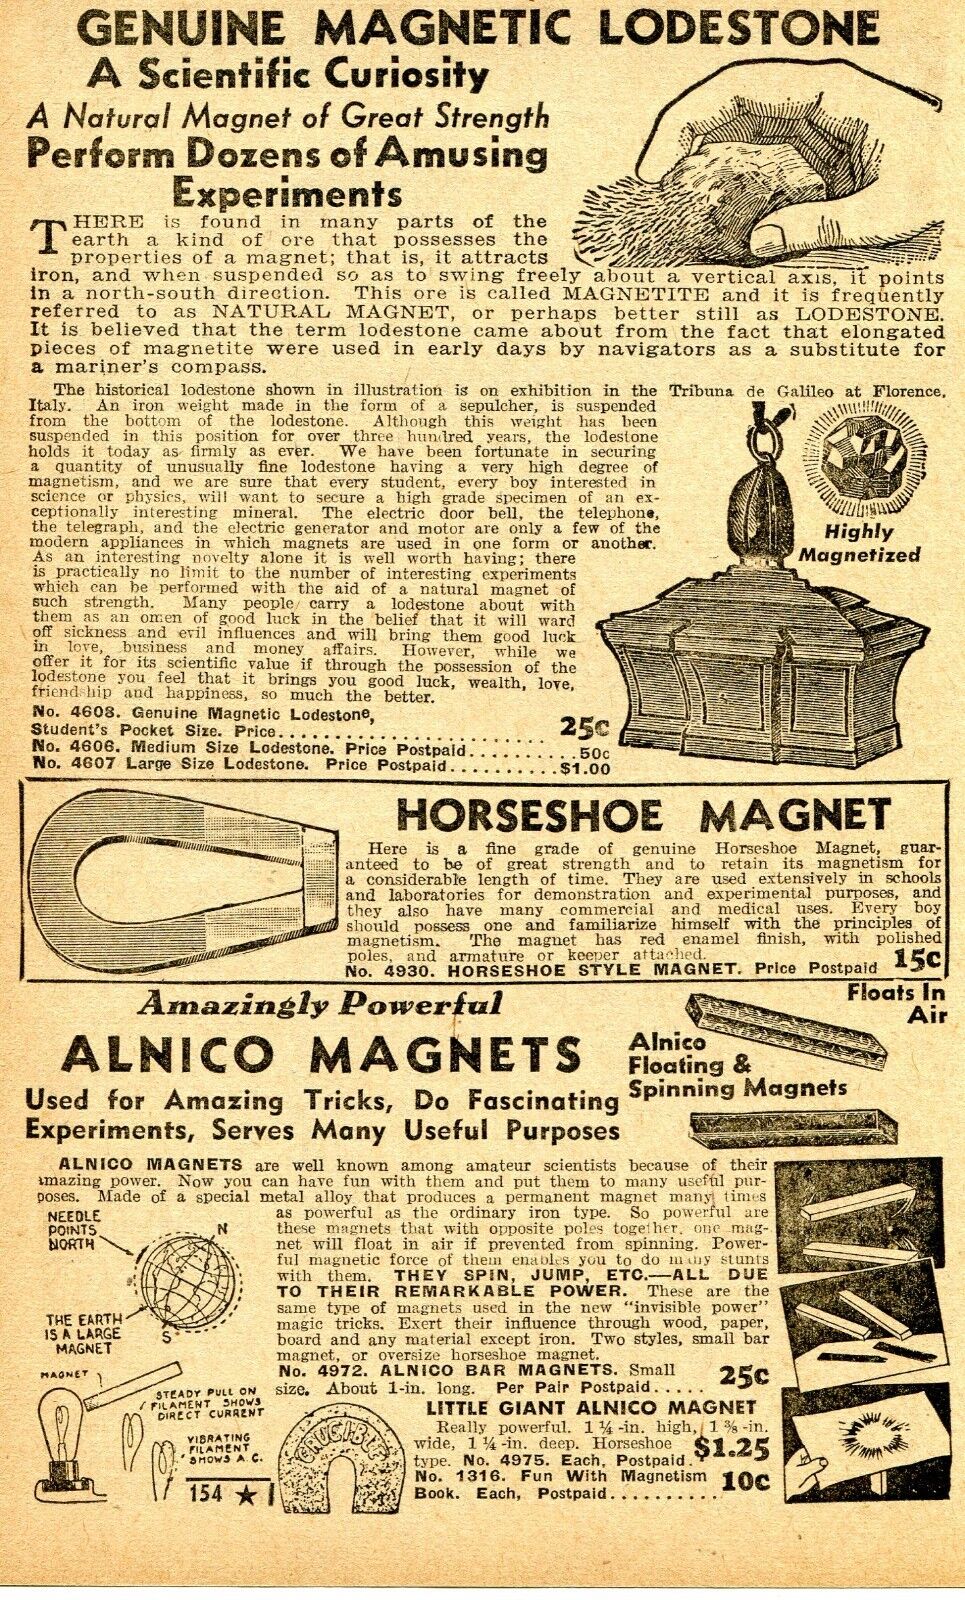 1950 small Print Ad of Alnico Magnets, Horseshoe Magnet & Magnetic Lodestone